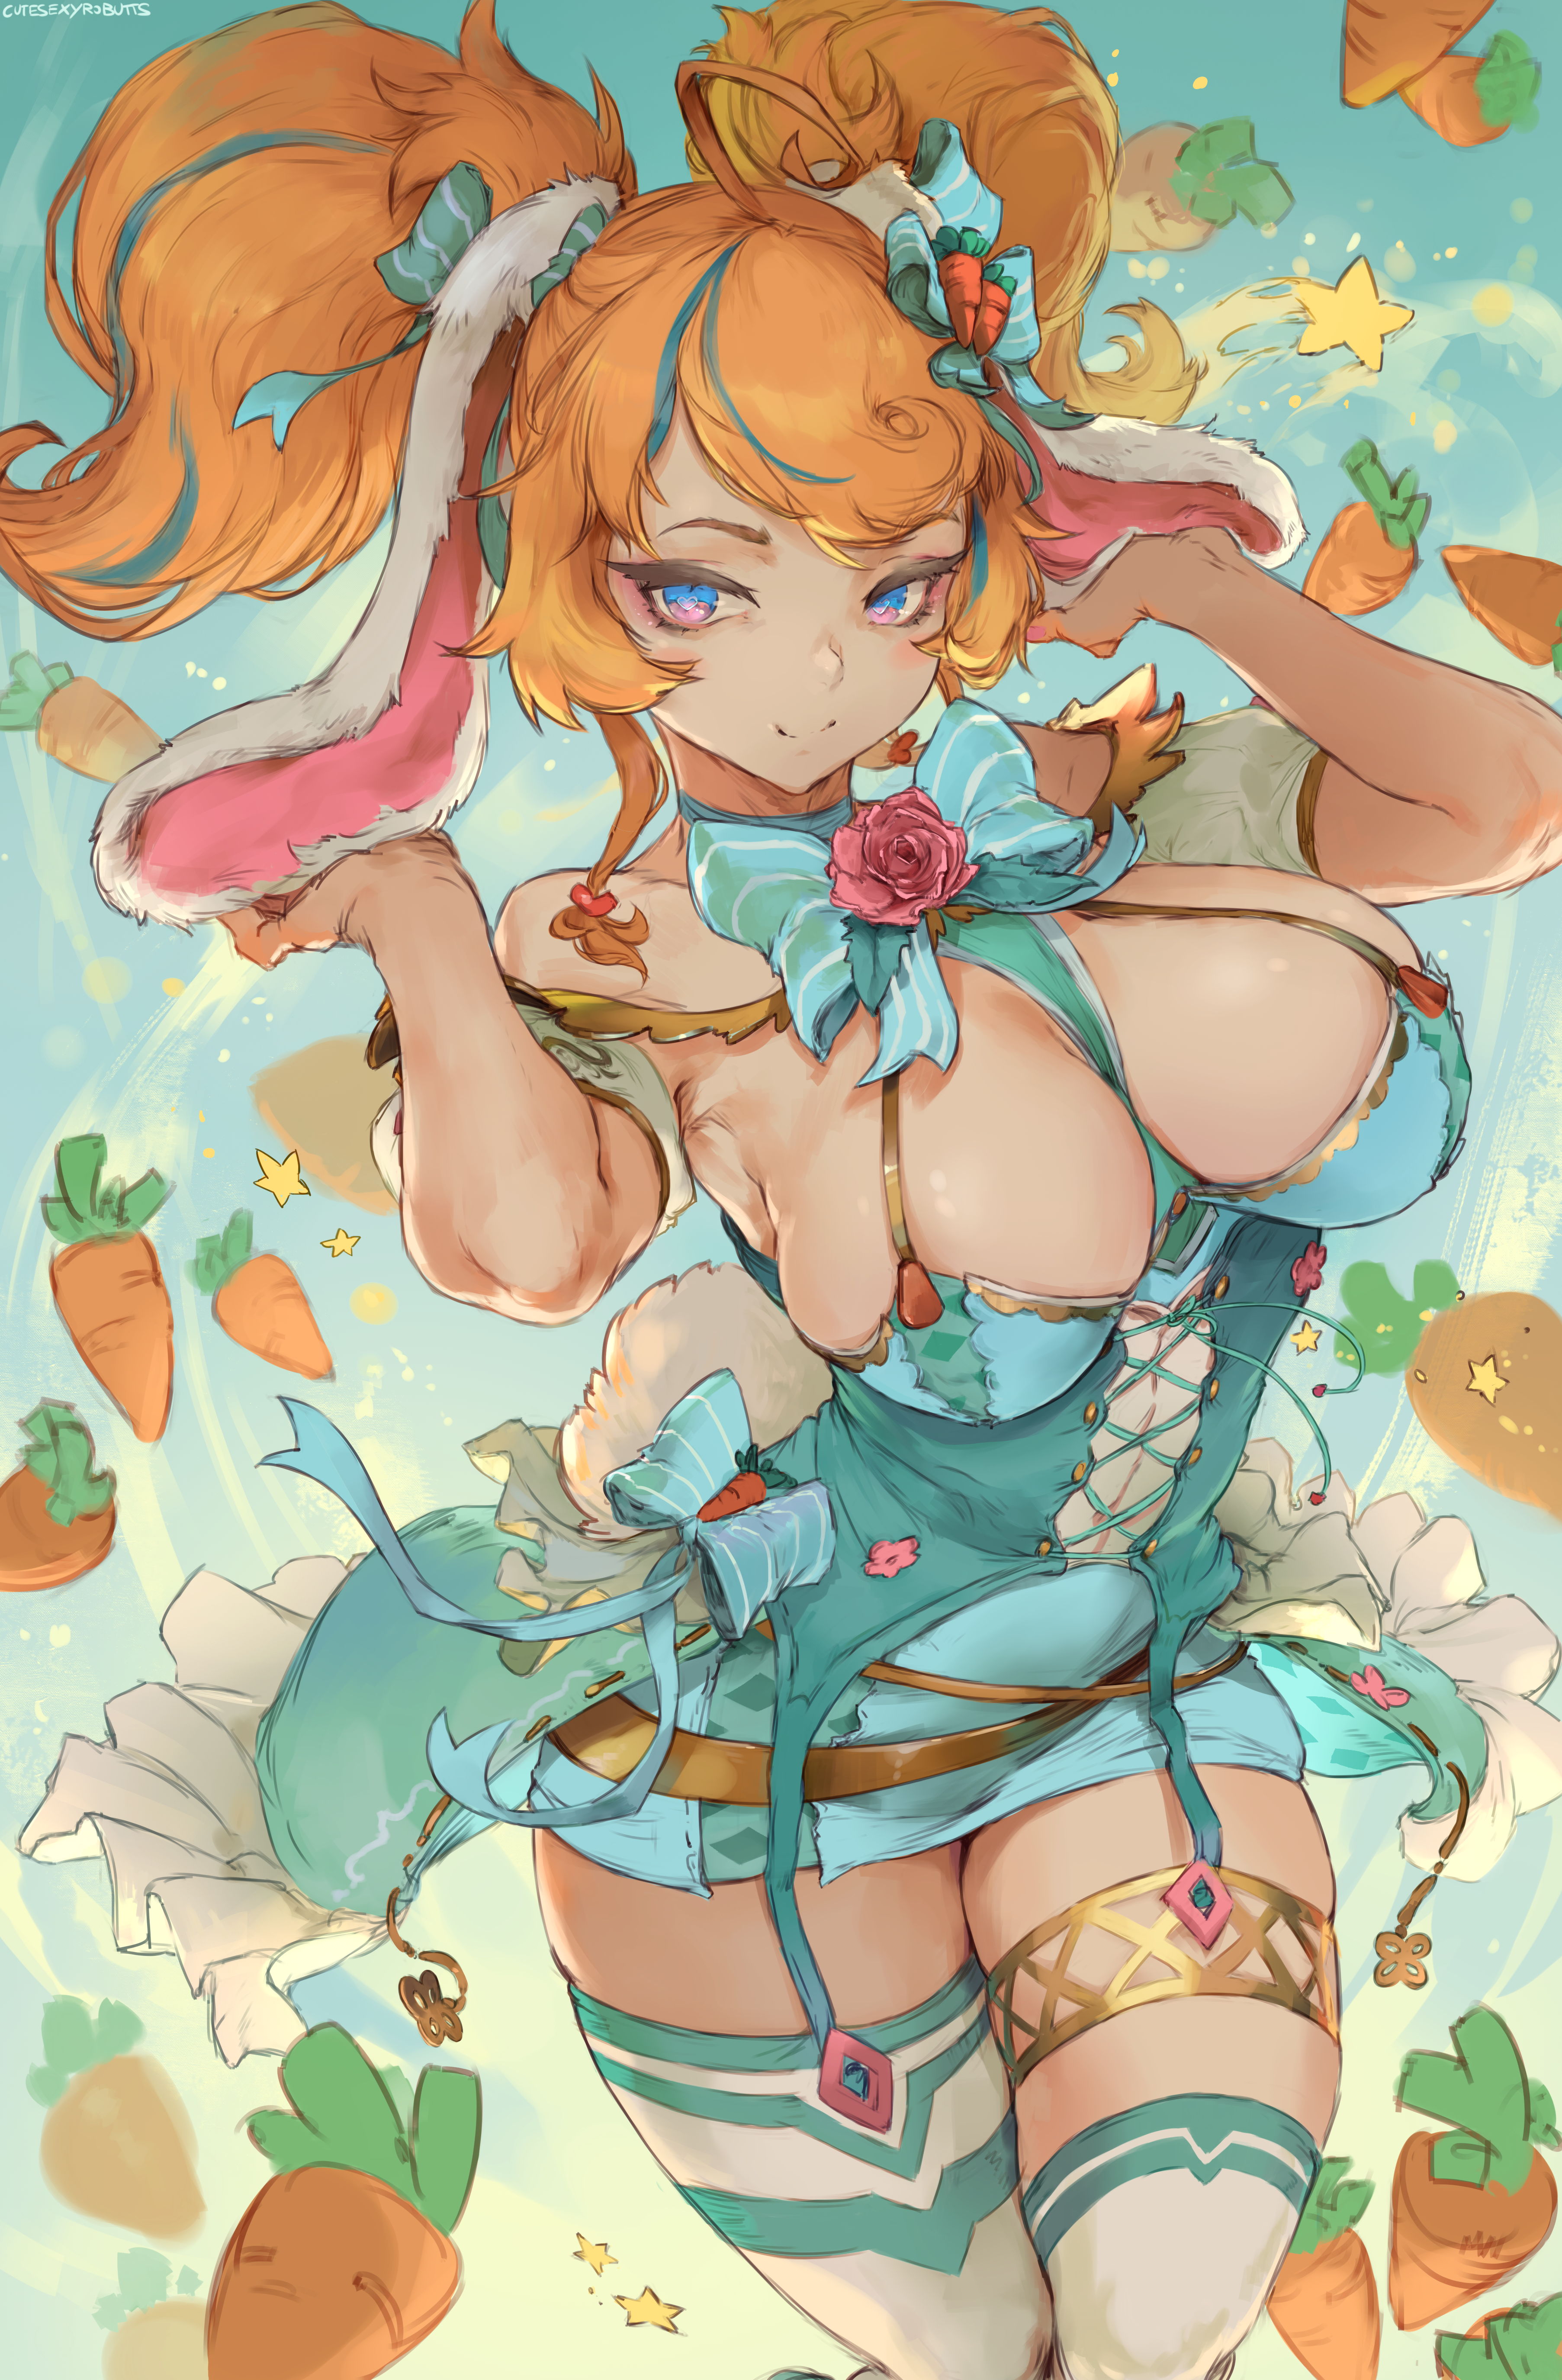 Anime 3610x5500 anime anime girls looking at viewer bare shoulders no bra big boobs corset fantasy girl portrait display drawing artwork fan art Cutesexyrobutts Virtual Youtuber bunny girl Bunny Gif thigh-highs carrots blonde 2D bunny ears twintails smiling cleavage stockings dress vegetables